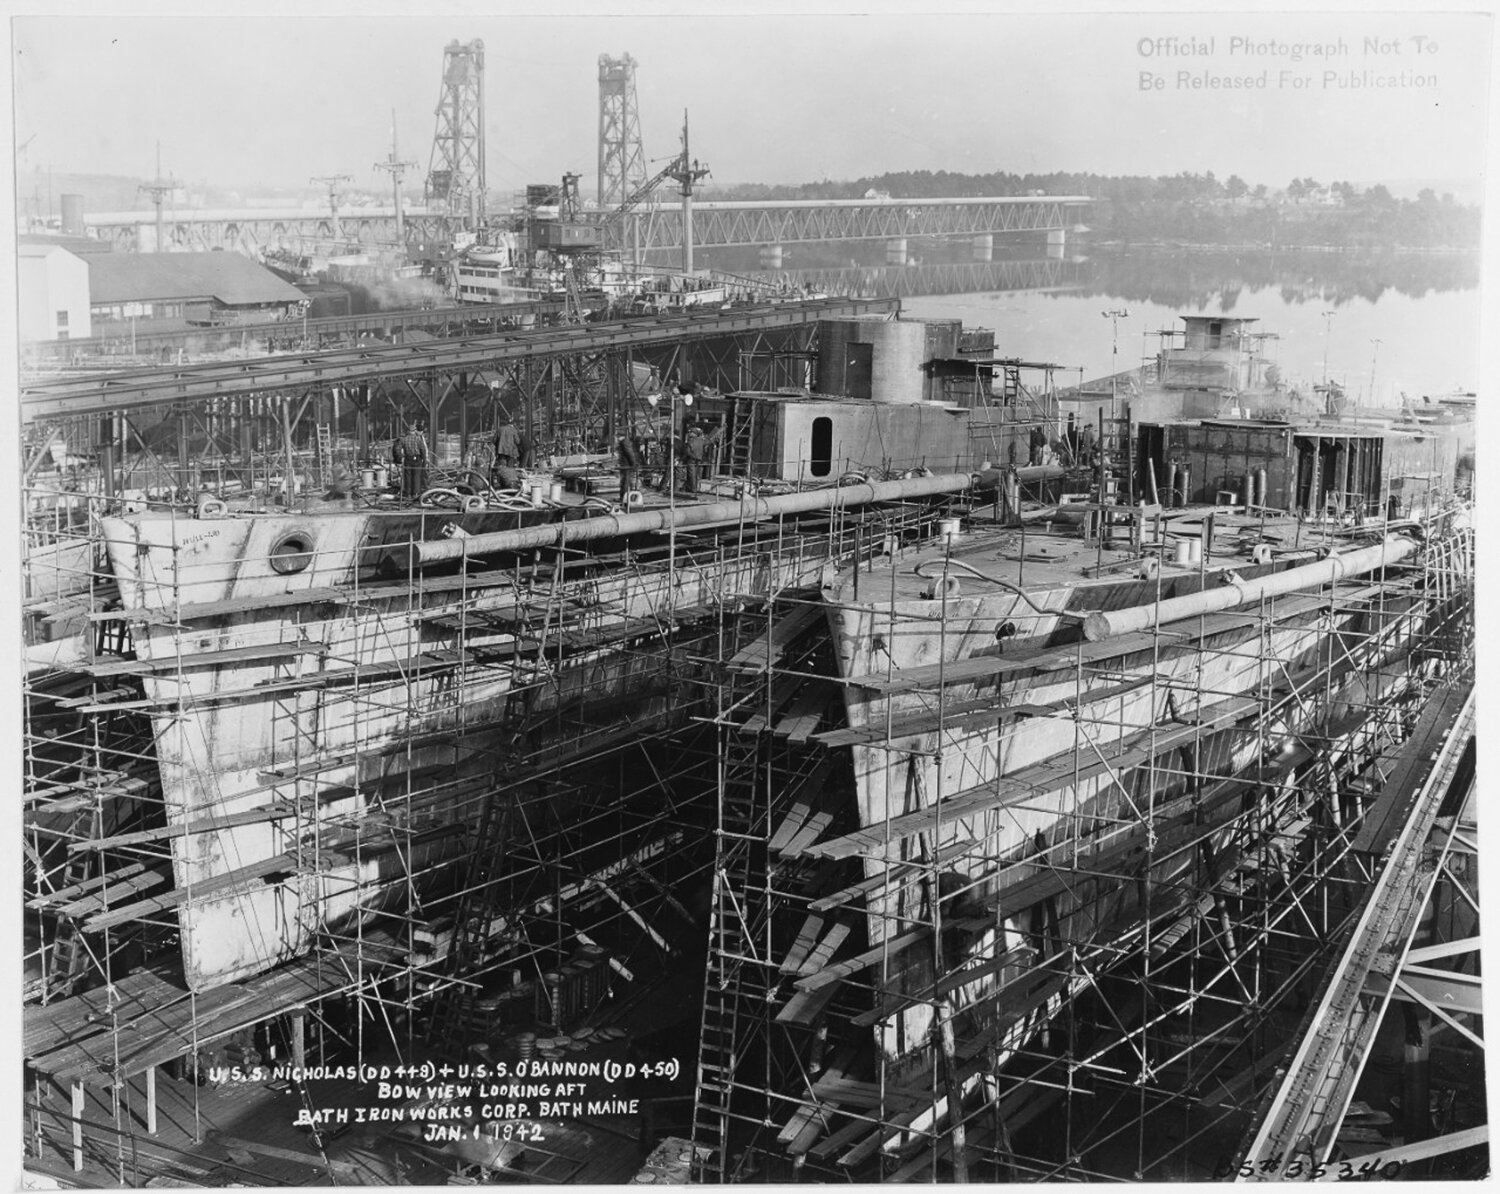 The U.S.S. Nicholas, left, and U.S.S. O'Bannon, right, are pictured under construction together at Bath Iron Works in Main on Jan. 1, 1942. Photo courtesy the National Archives.